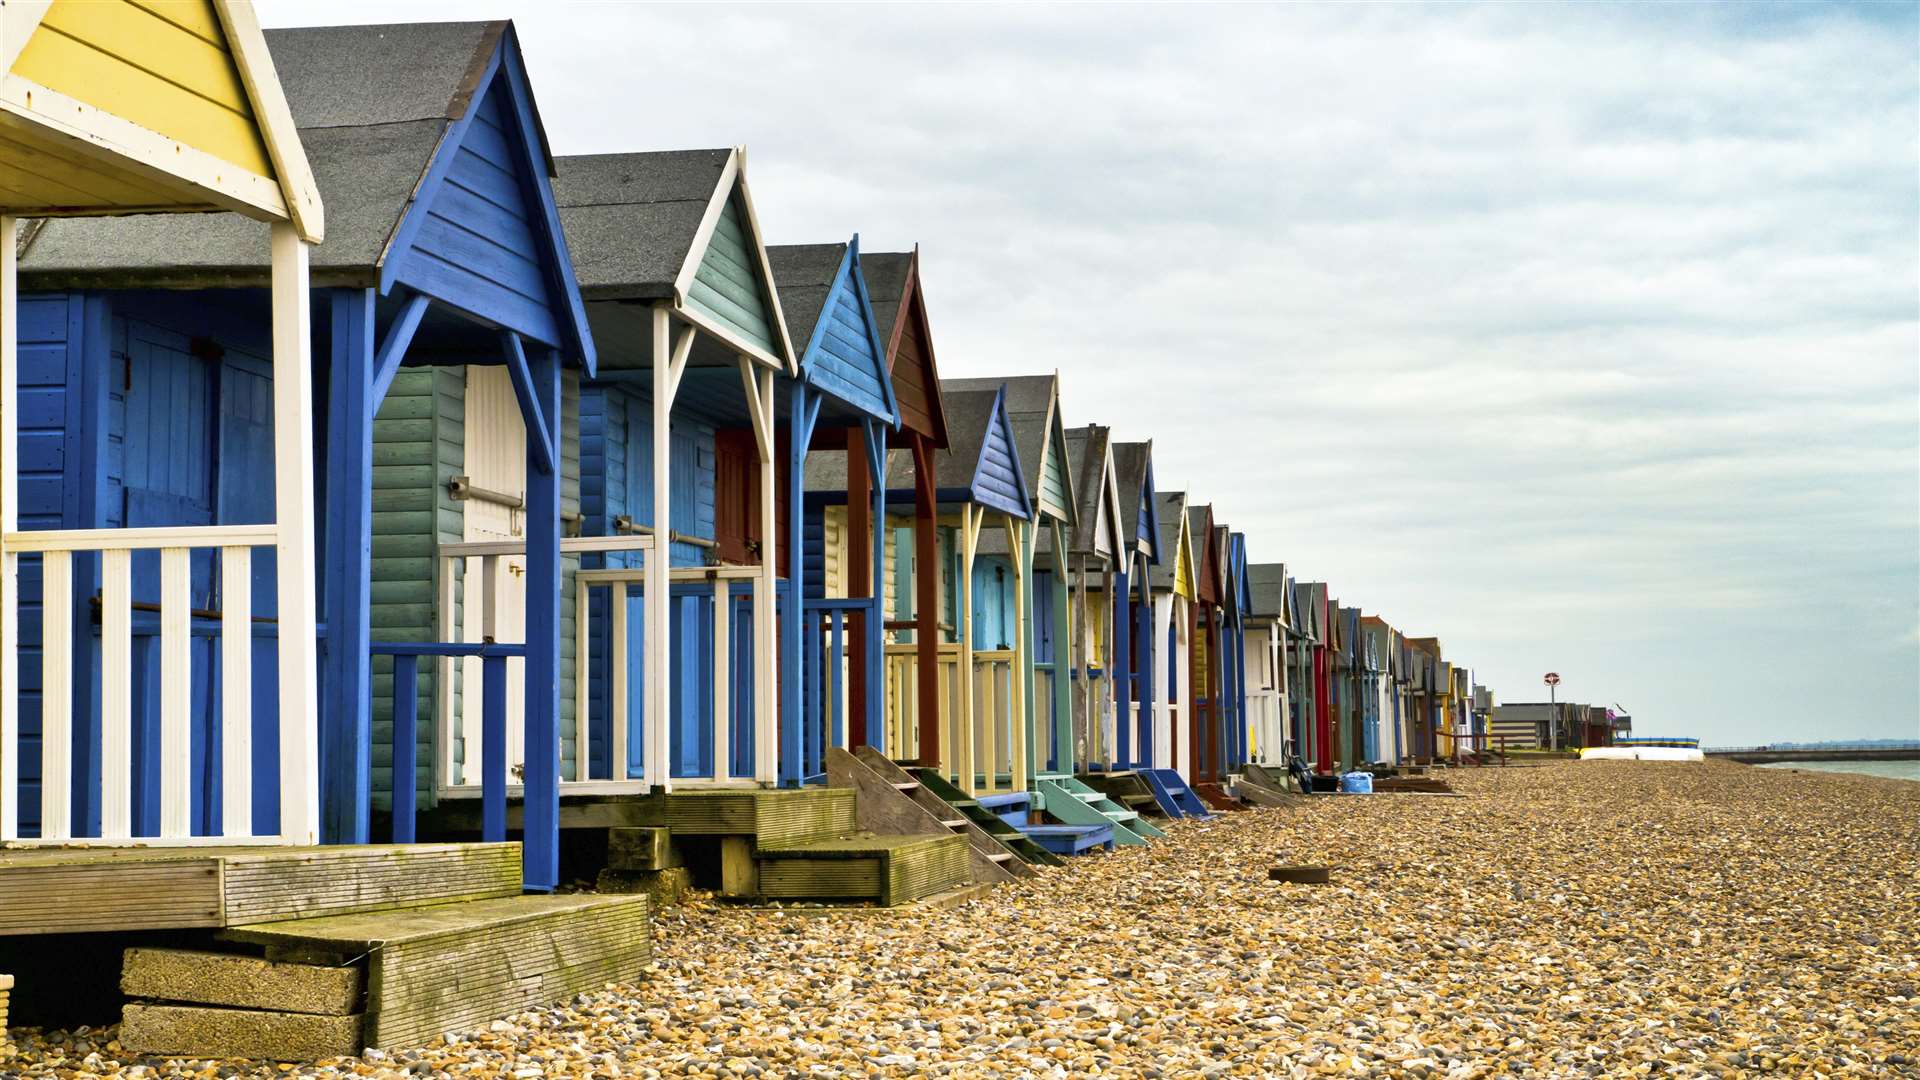 Beach huts can be an attractive focal point along the shore